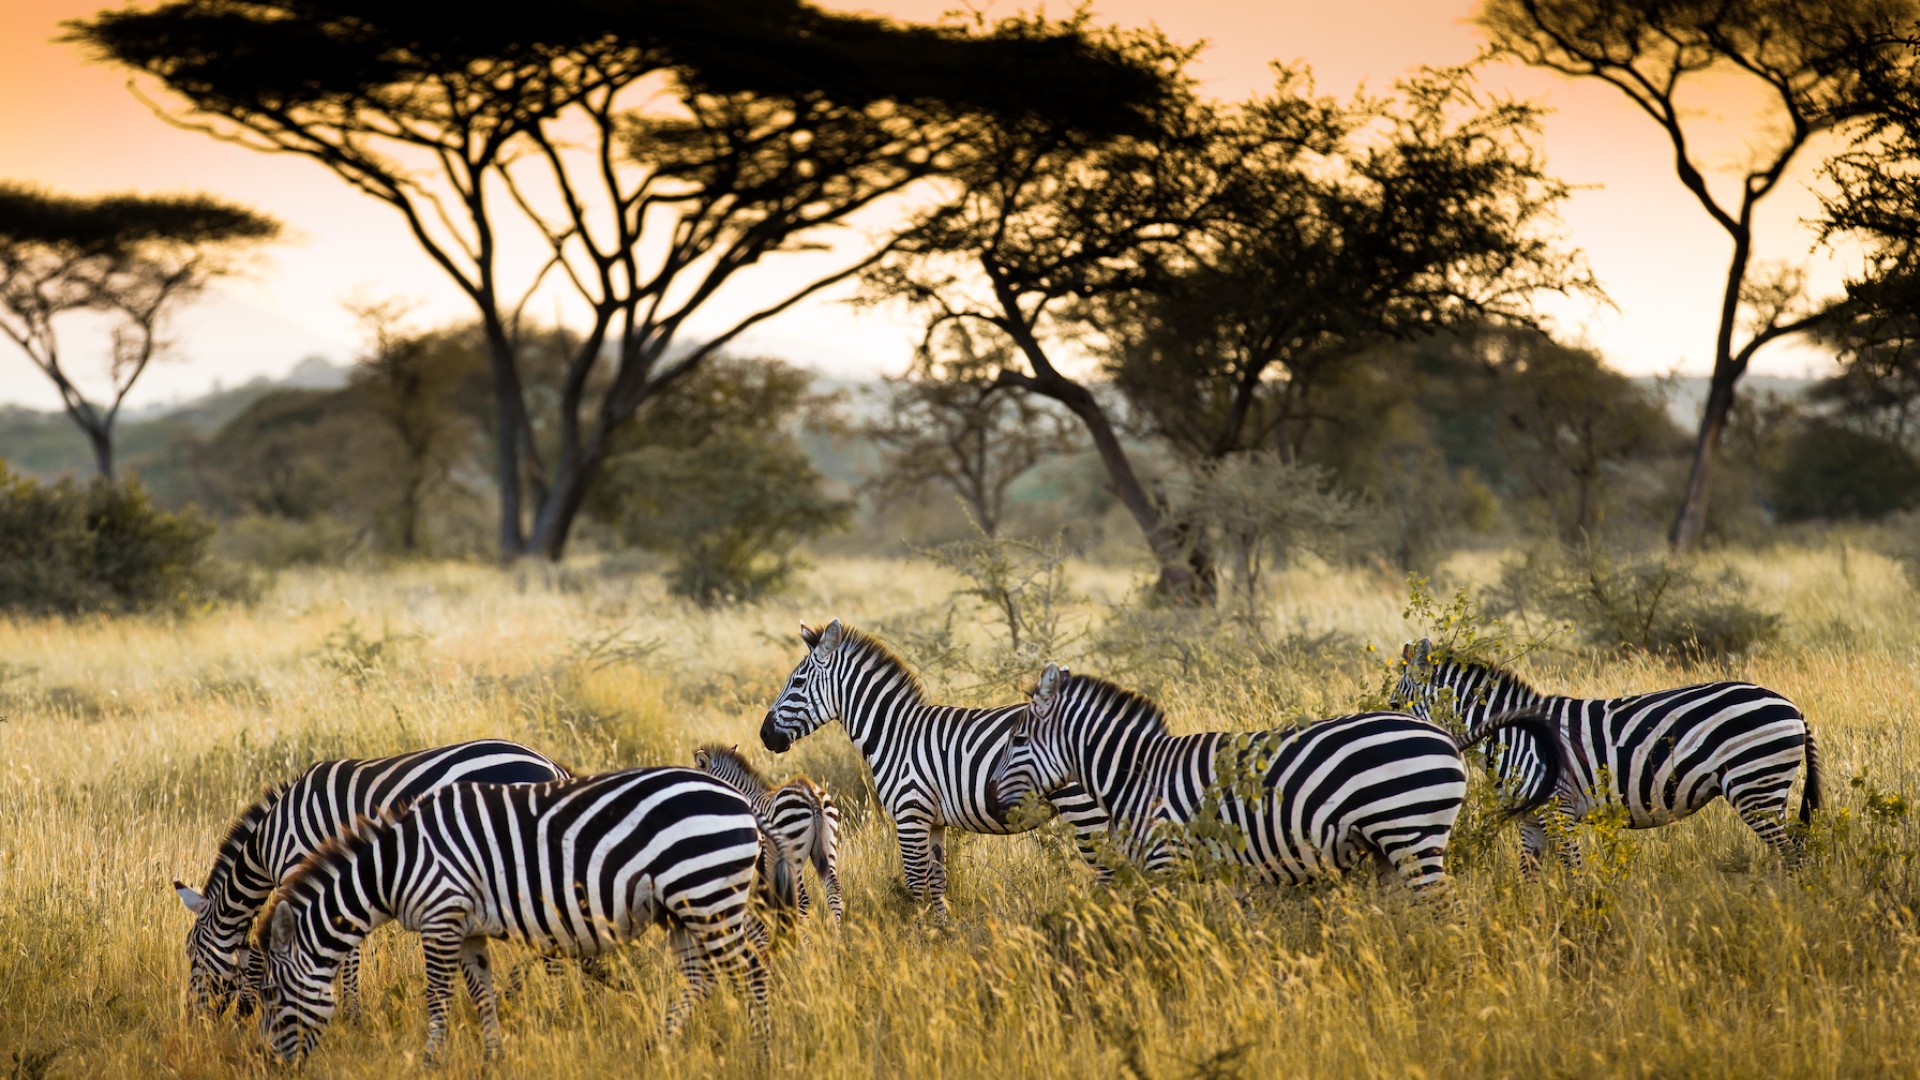 A heard of zebras in a grassy field at sunset with trees behind that with an orange sky backdrop